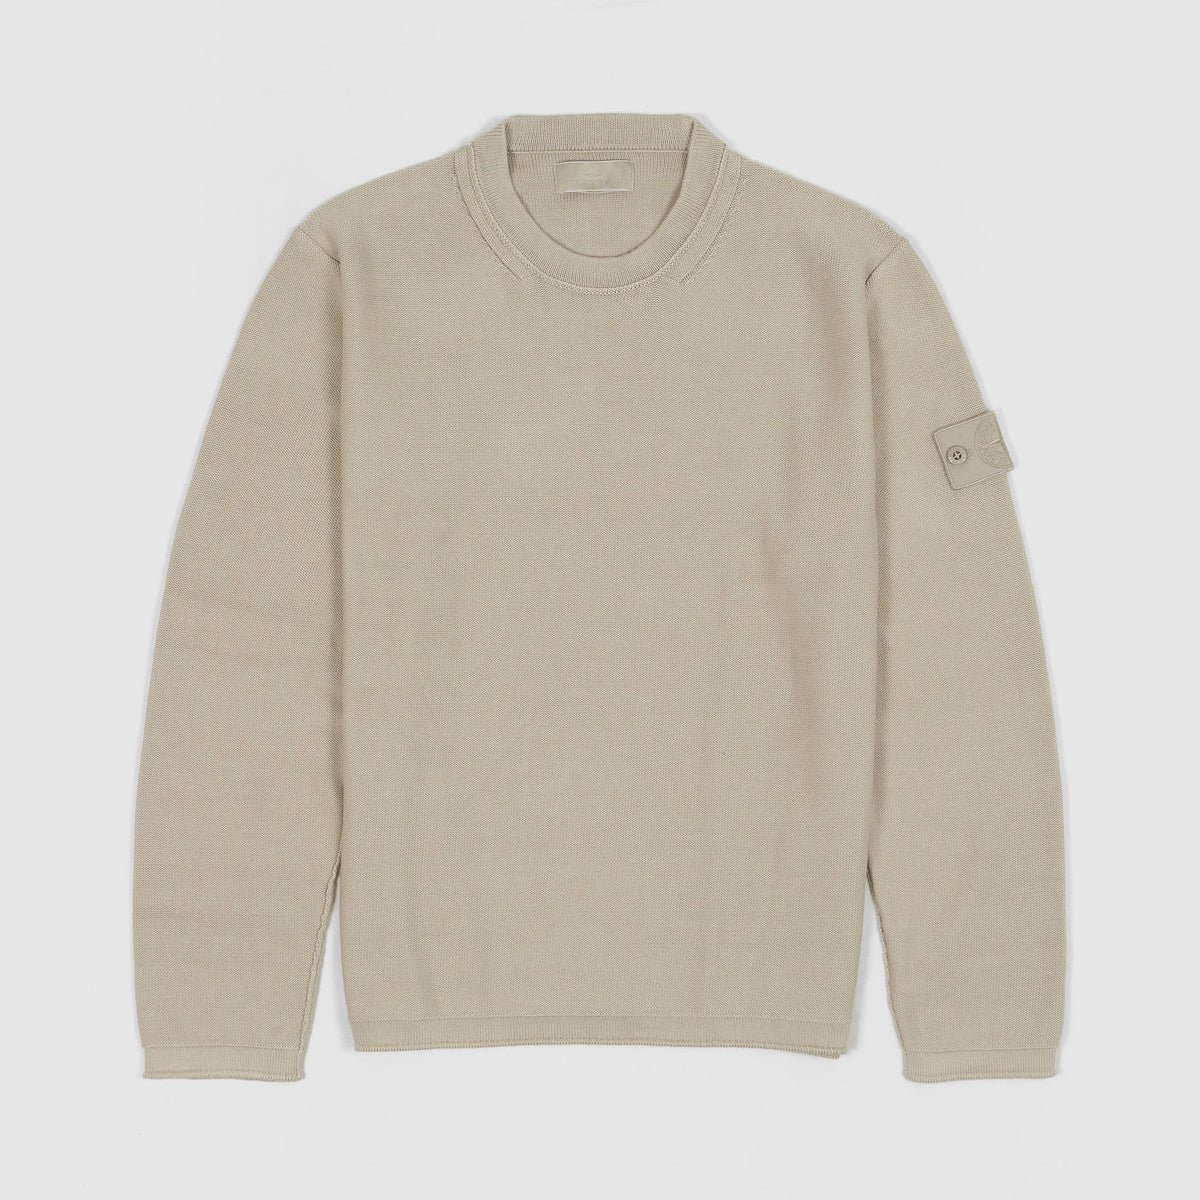 Stone Island Ghost Piece Knitted Lightweight Crew Neck Pullover